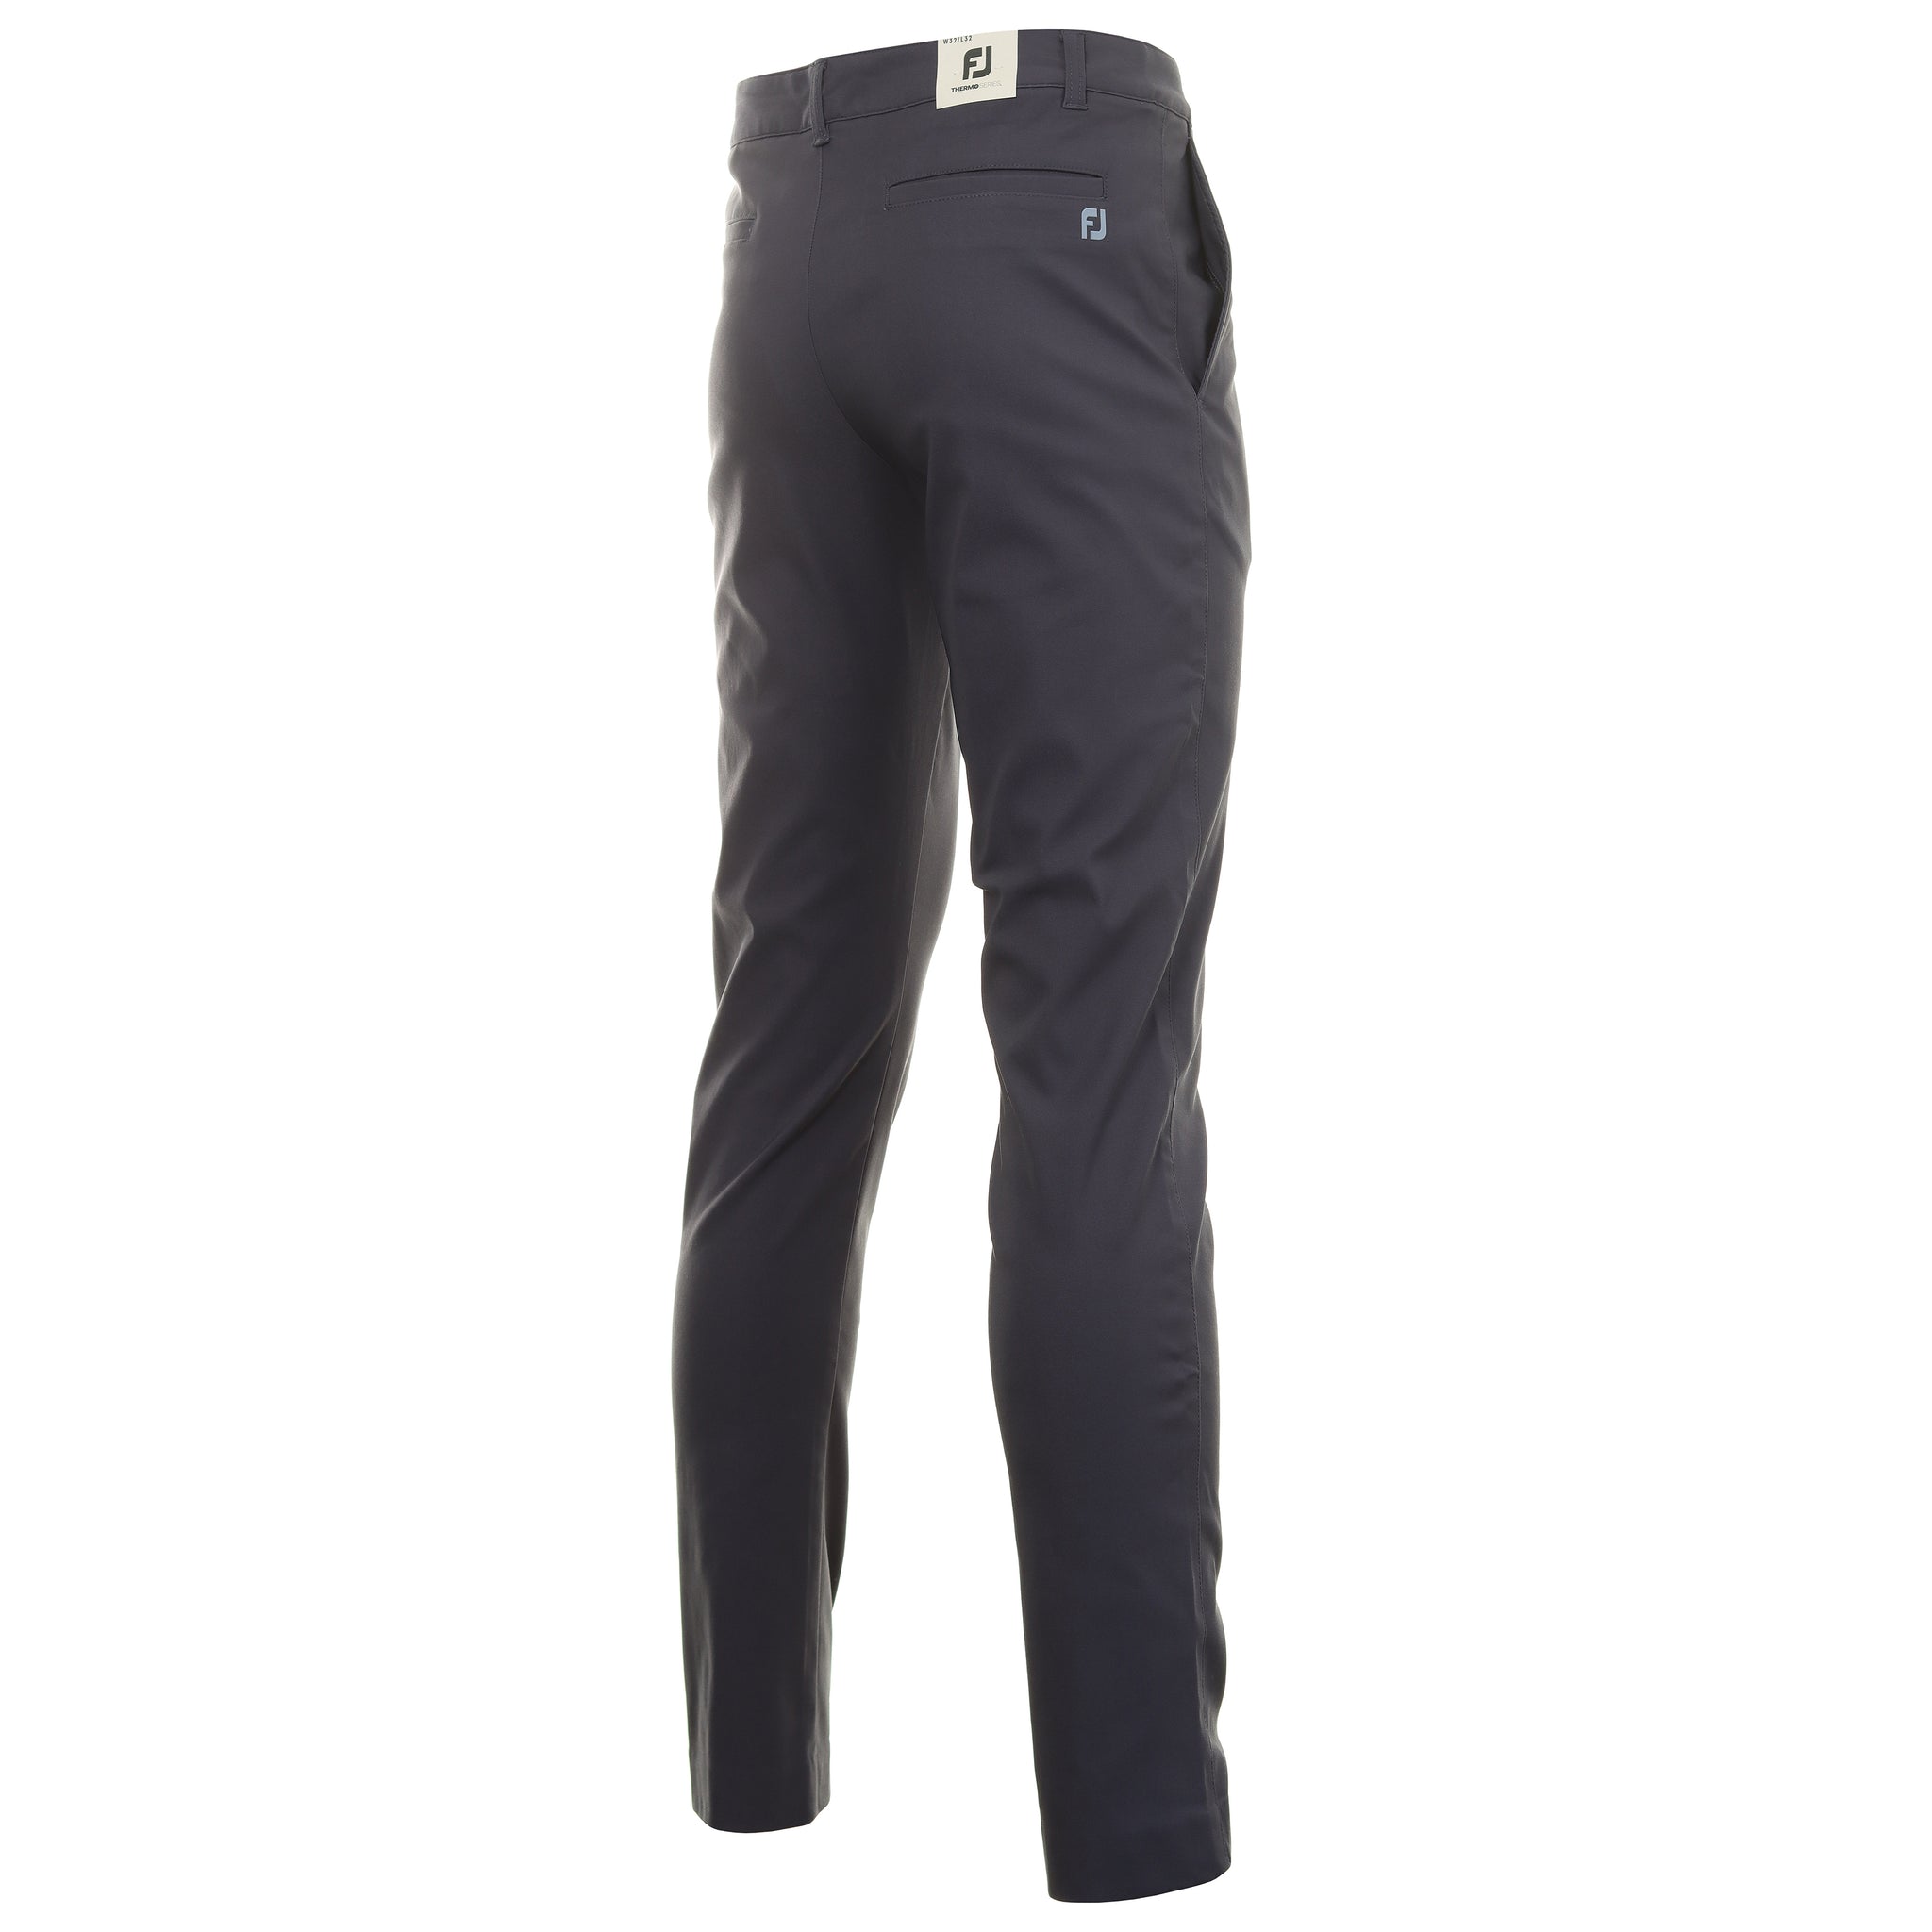 FootJoy ThermoSeries Trousers 88815 Charcoal | Function18